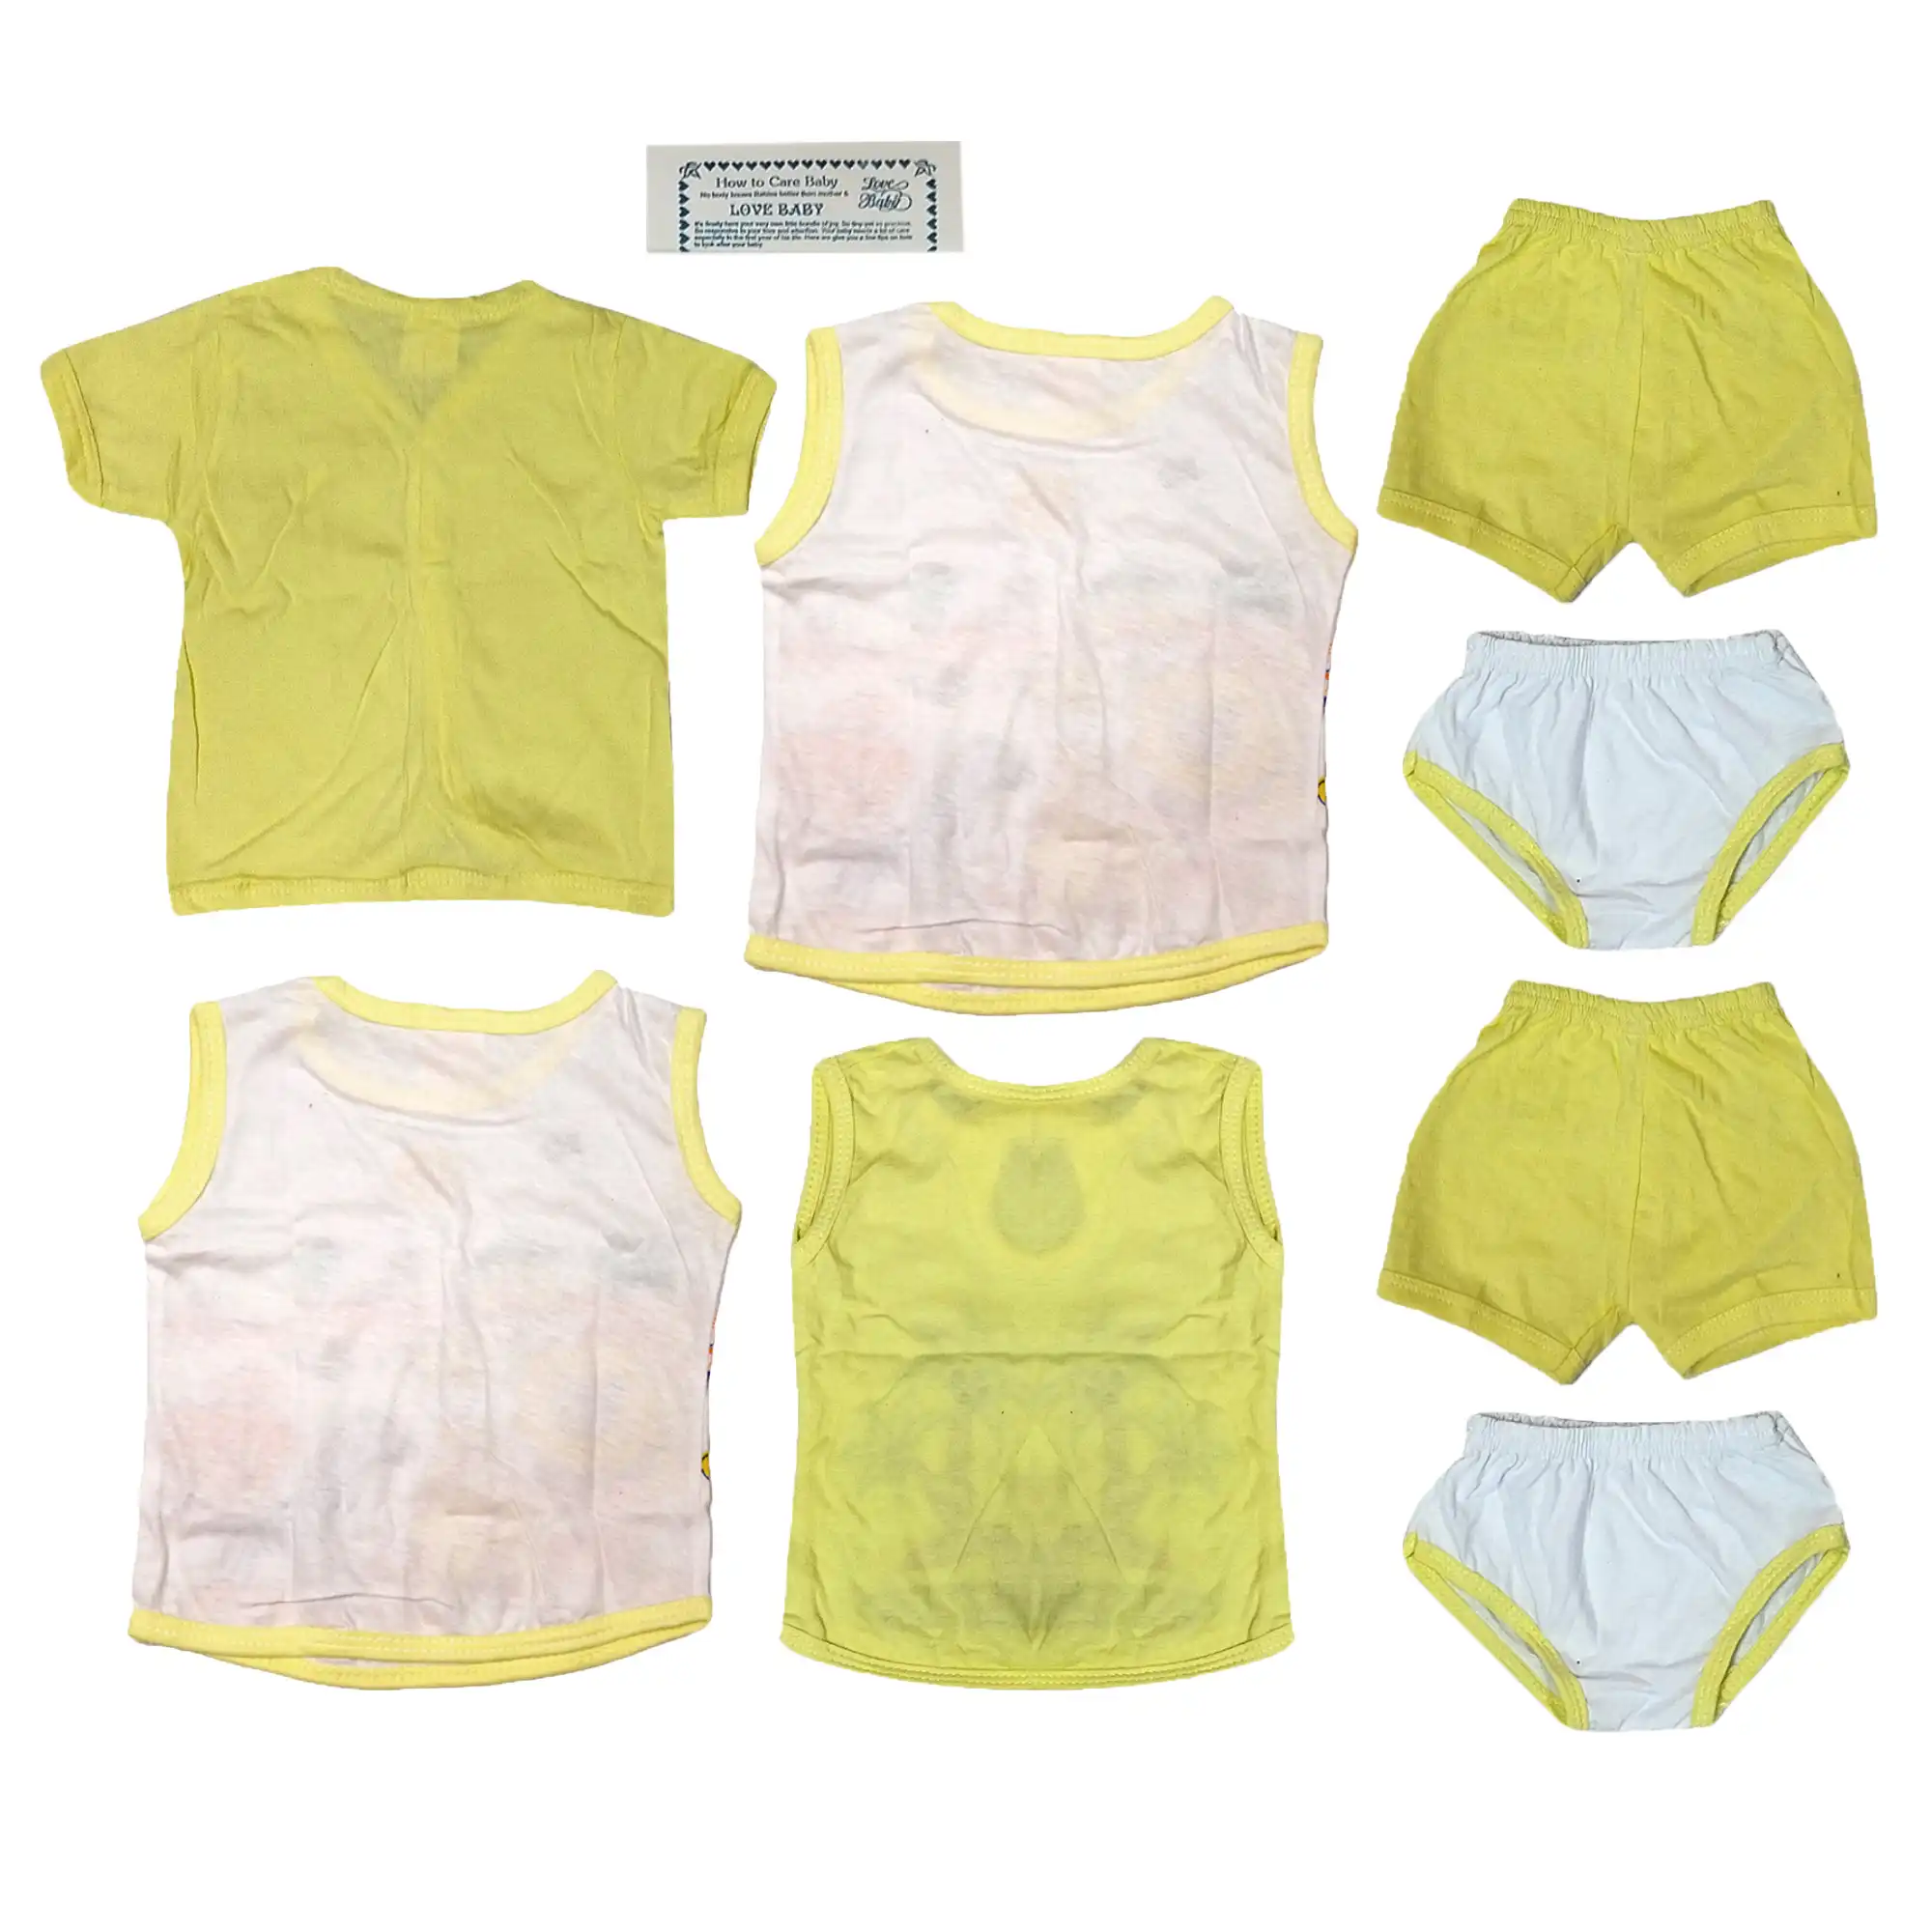 Baby Shower Gift Set 0 to 6 Months Yellow 3